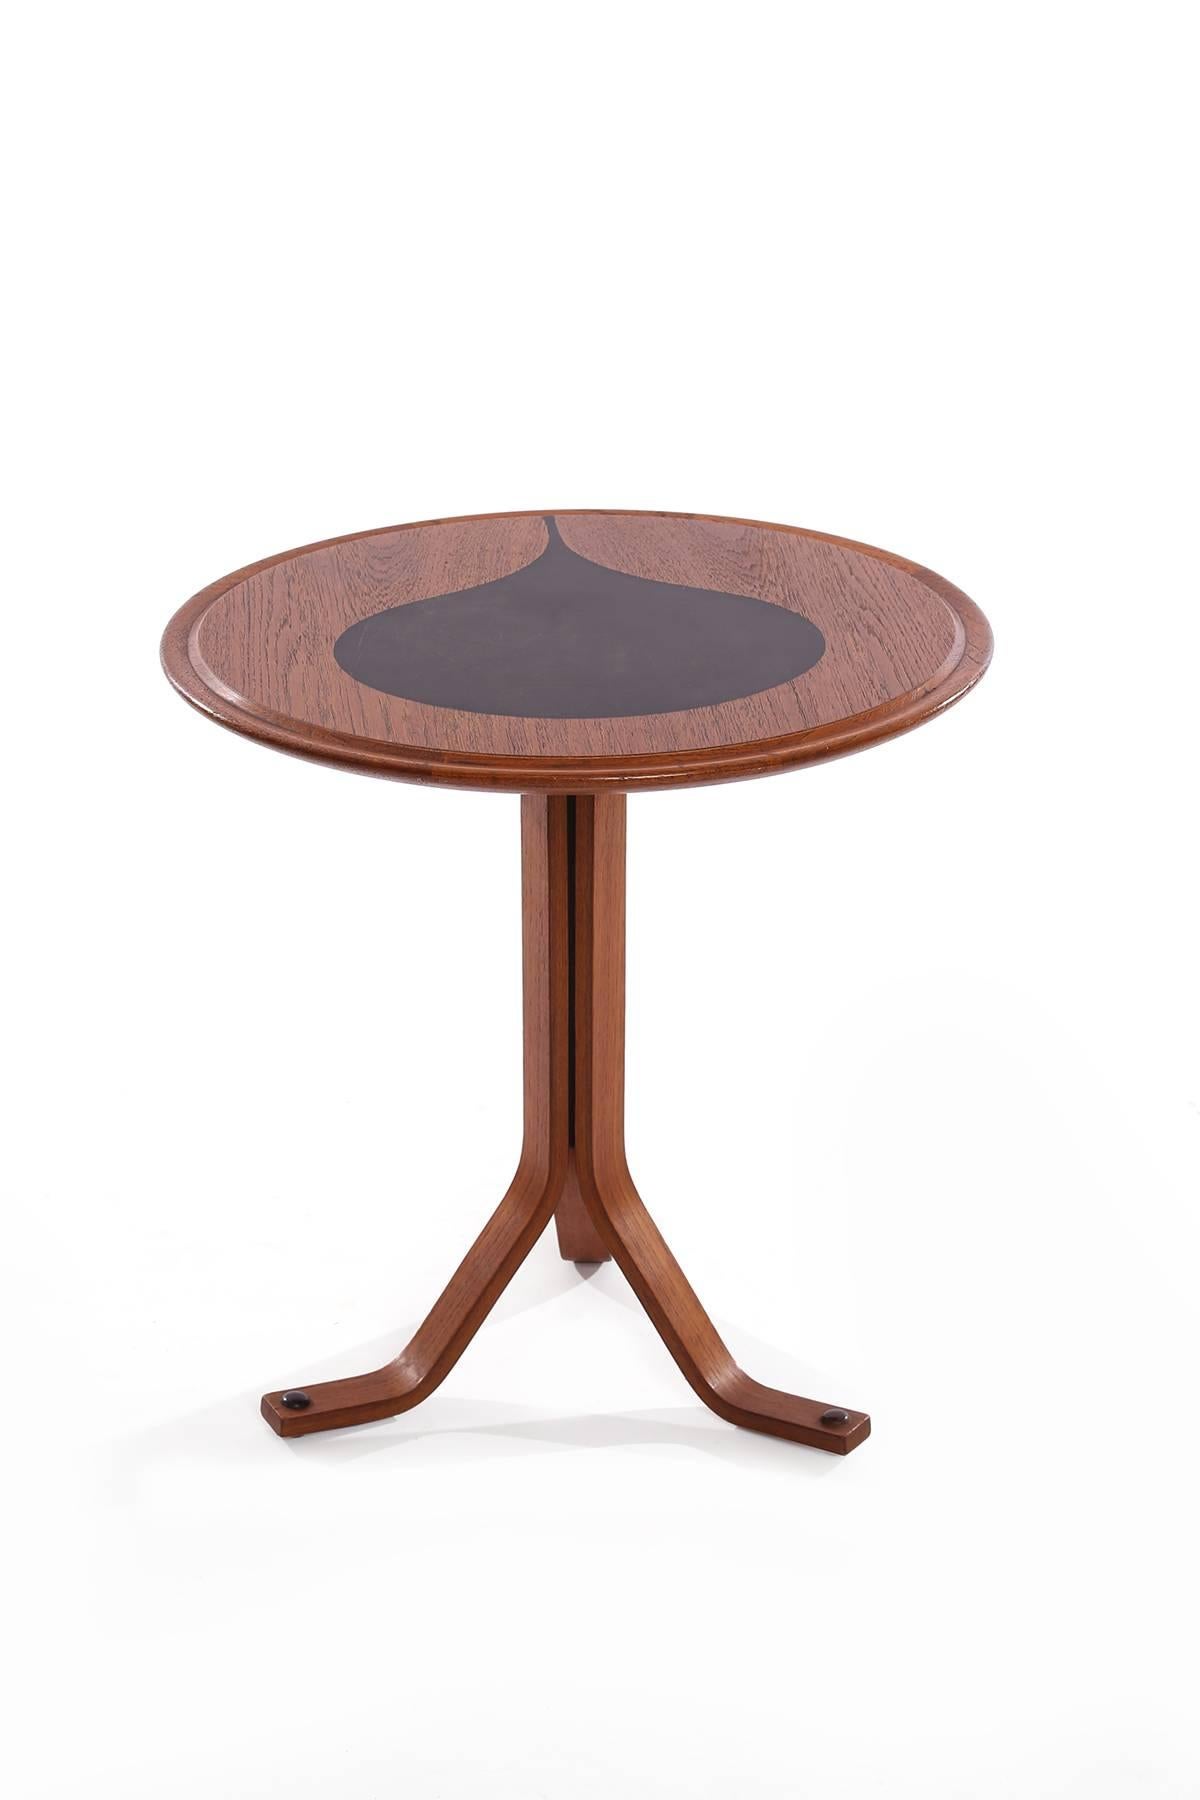 Danish Sculptural Teak and Laminate Side Table by Selig